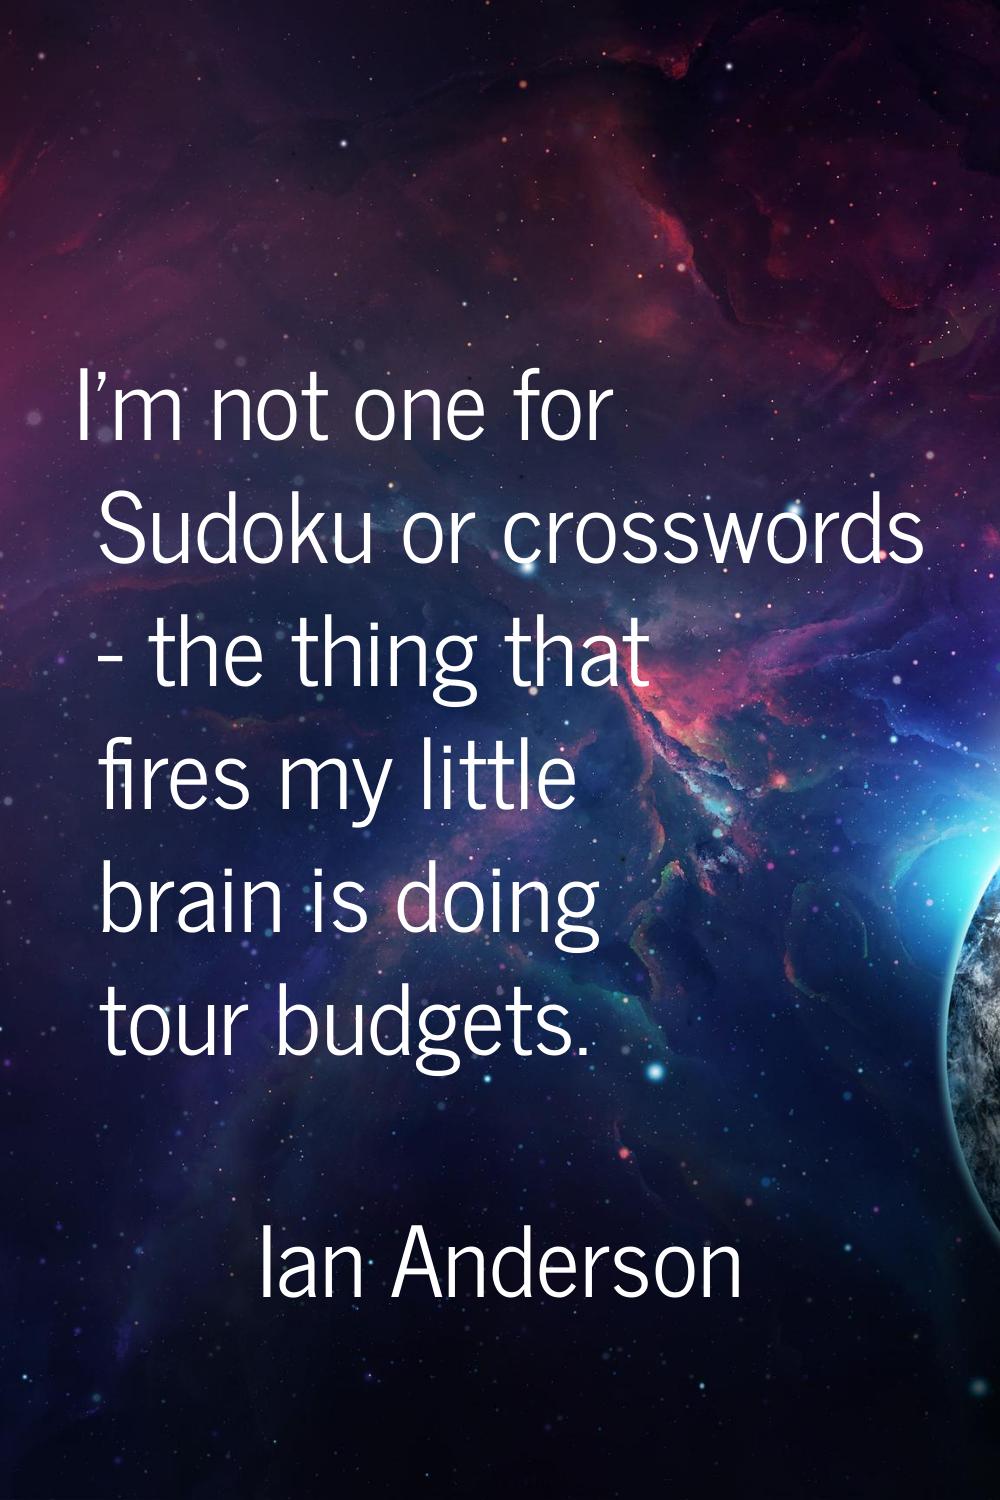 I'm not one for Sudoku or crosswords - the thing that fires my little brain is doing tour budgets.